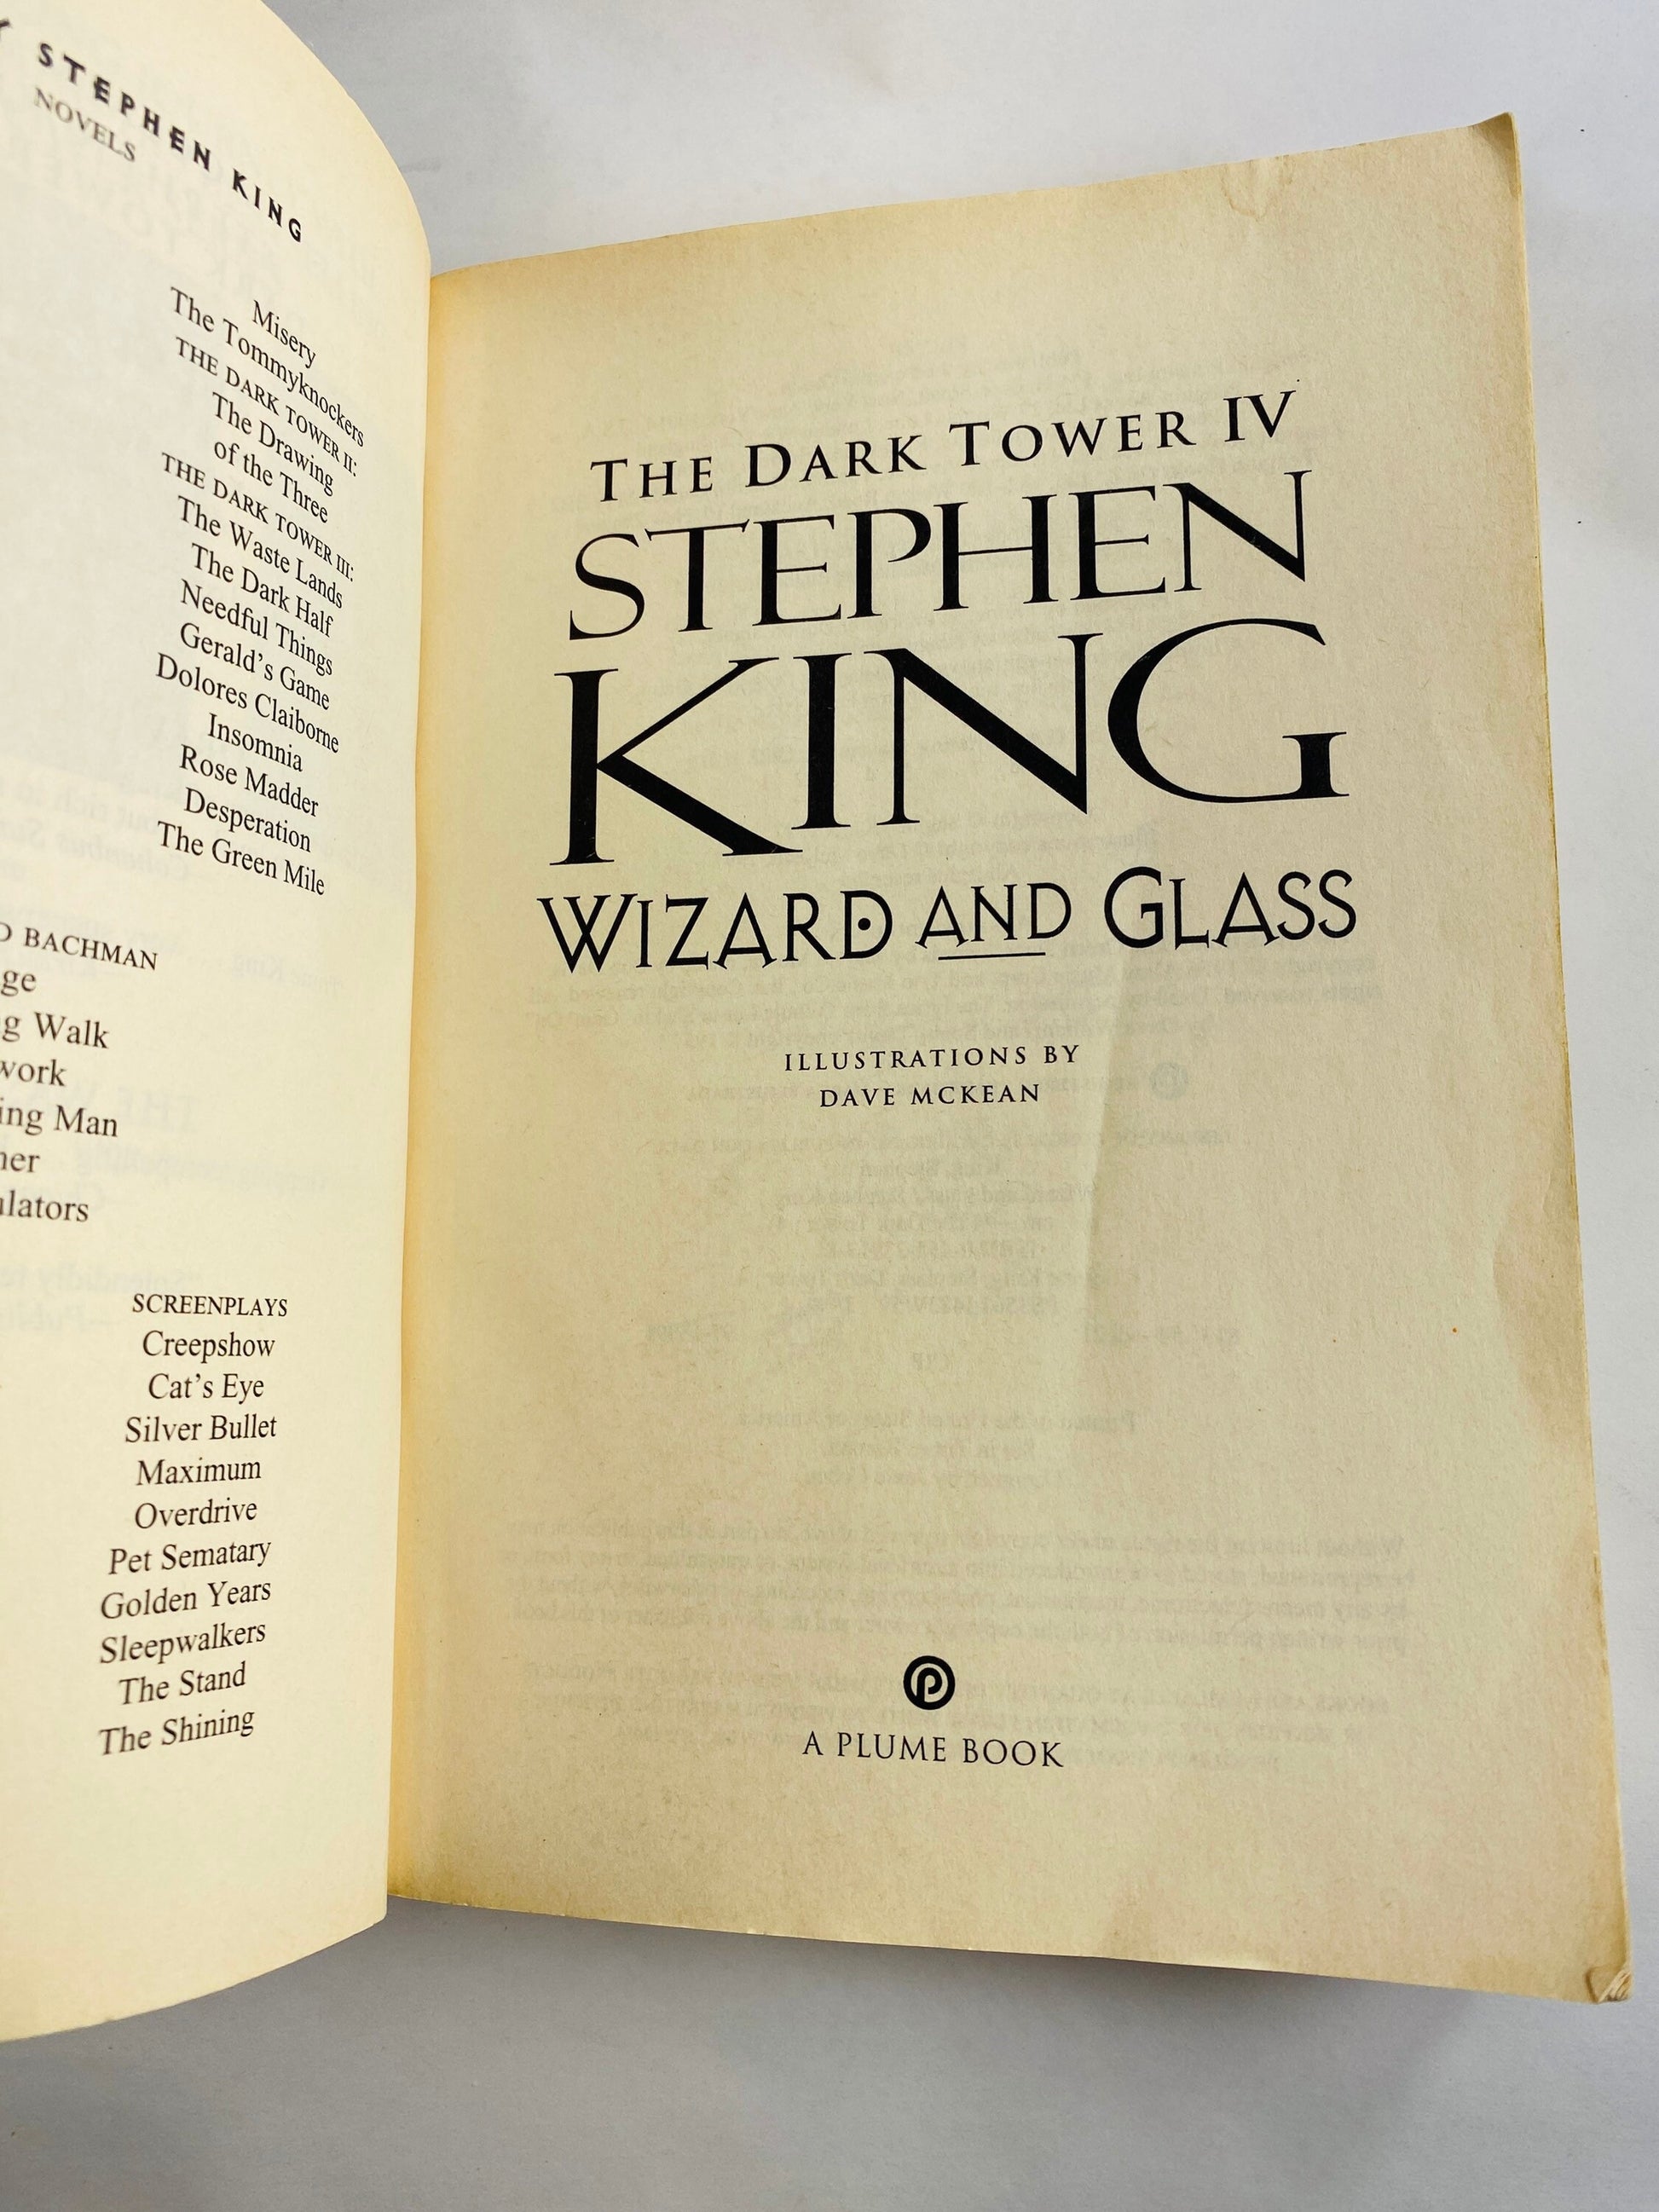 Dark Tower IV Wizard and Glass by Stephen King. Vintage FIRST Plume paperback book circa 1997 Book Lover Gift.